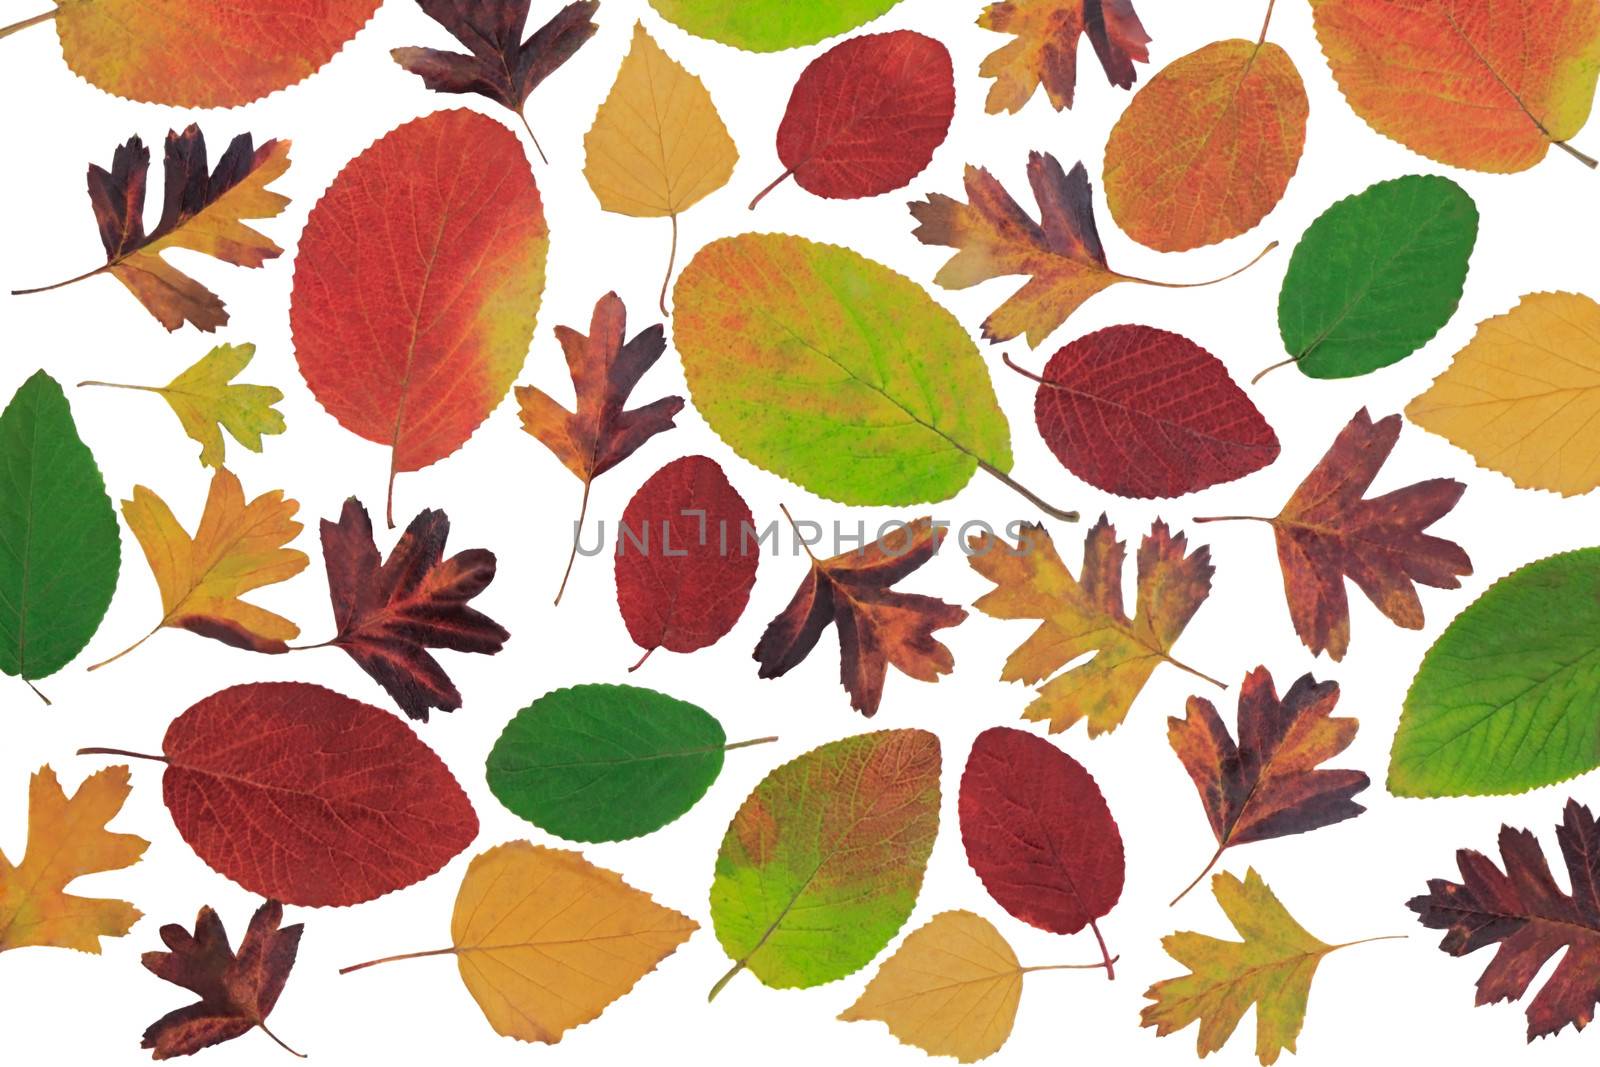 Many beautiful bright autumn leaves variety of colors and shapes with different kinds of trees on a white background.